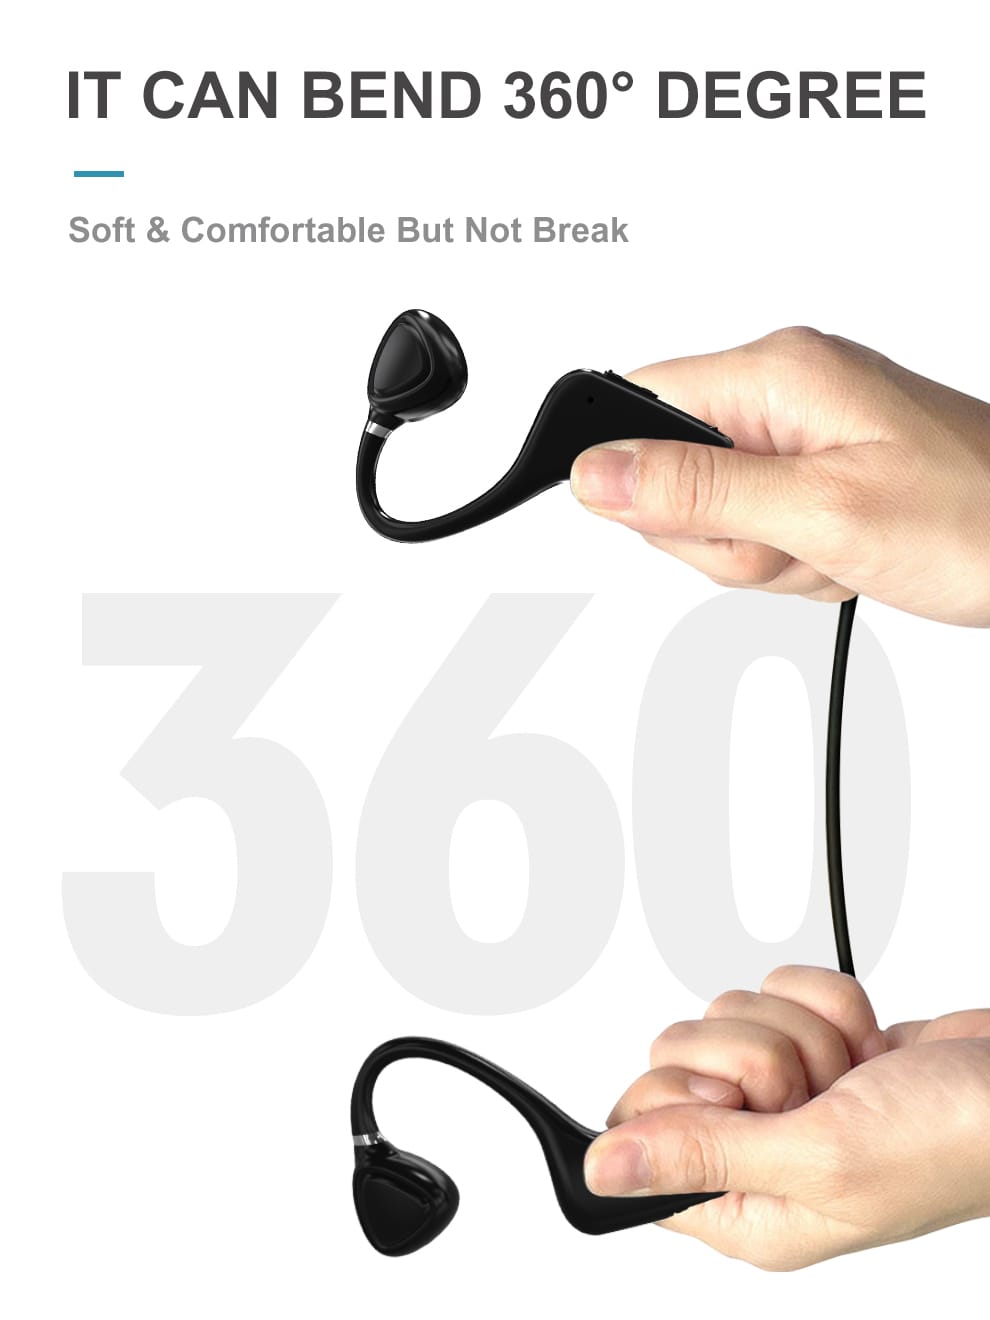 YES! IT'S HEARING AIDS SYSTEM, 2 functions in One system, eEAR® eEAR-BC-CIC-010 BONE CONDUCTION HEARING AID SYSTEM Rechargeable CIC Hearing Aids & Bone Conduction BT Sold 10,000+ worldwide